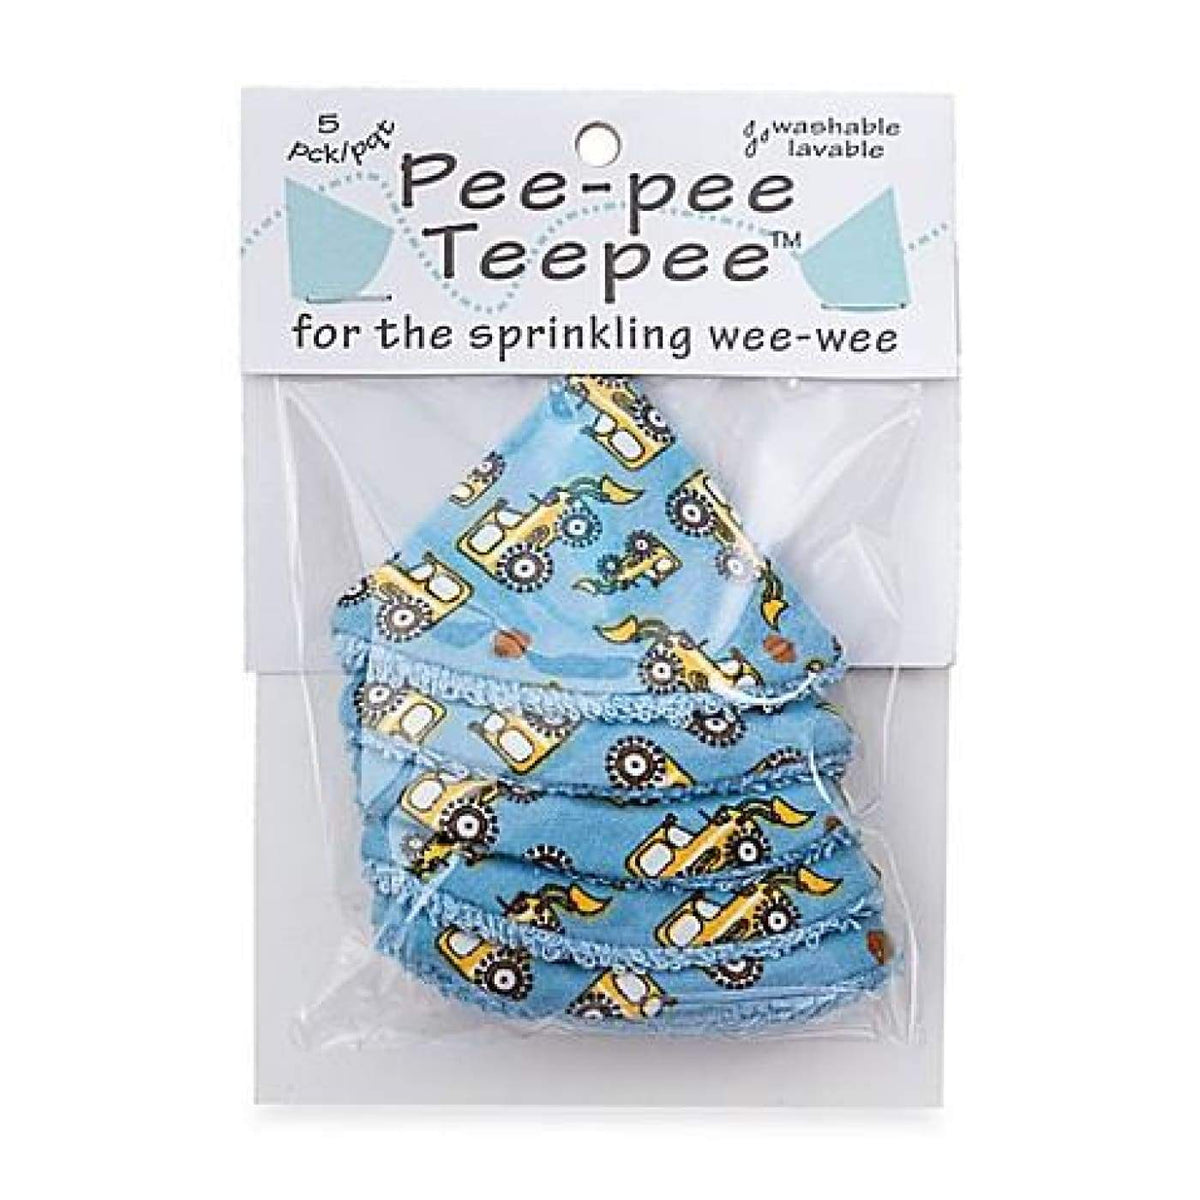 Pee-pee Teepees - Diggers - BATHTIME &amp; CHANGING - NAPPIES/WIPES/ACCESSORIES